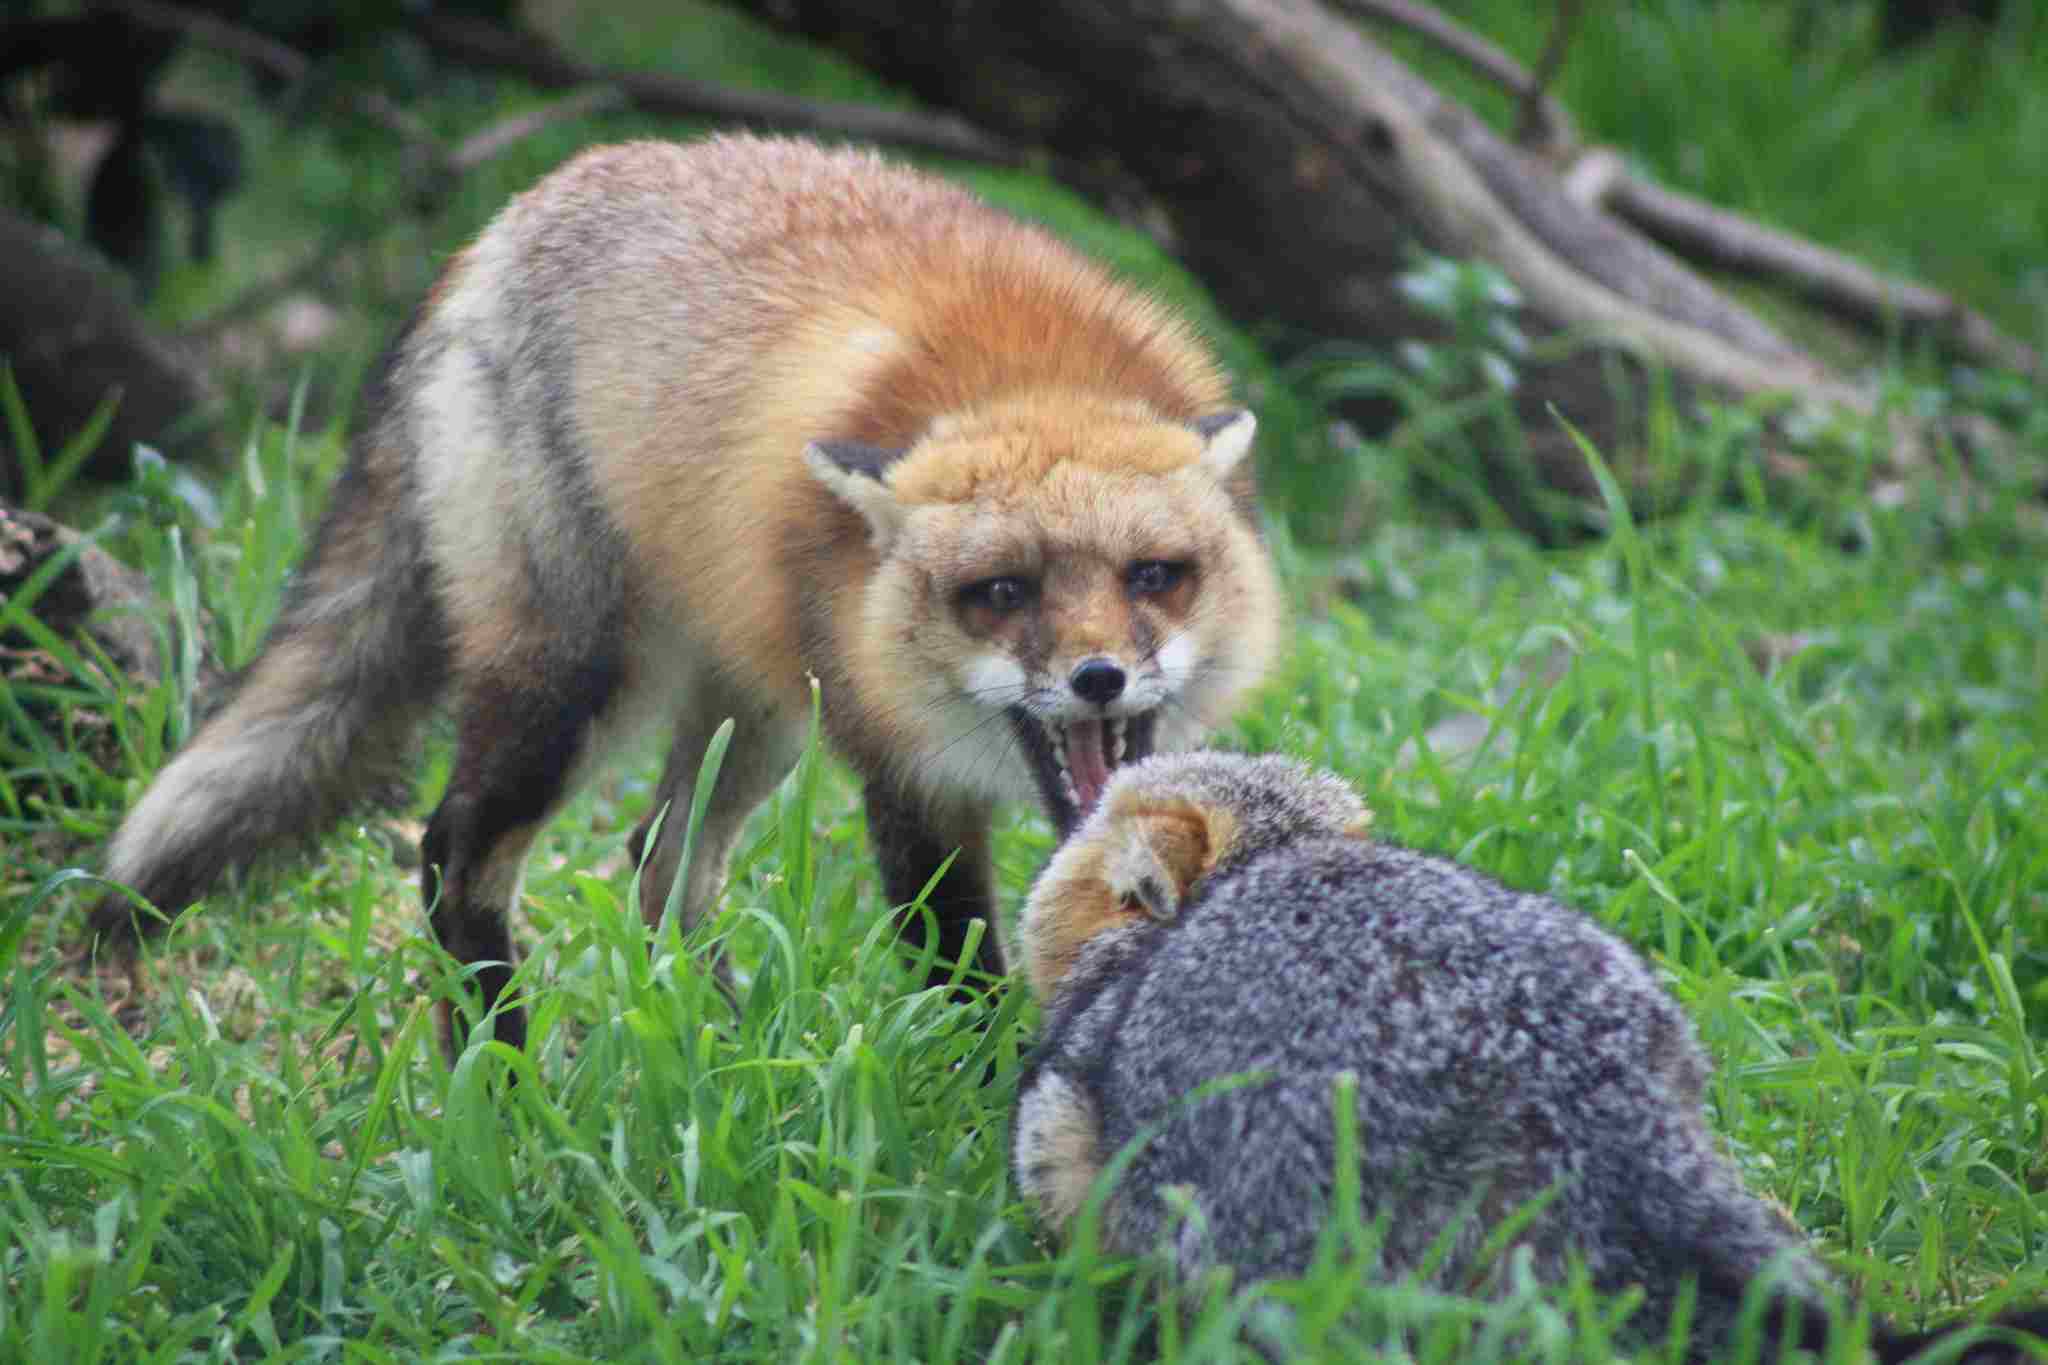 Red Fox Vs Gray Fox: Red Foxes are Notably Larger and Heavier Than Gray Foxes (Credit: USFWS Pacific Southwest Region 2013 .CC BY 2.0.)